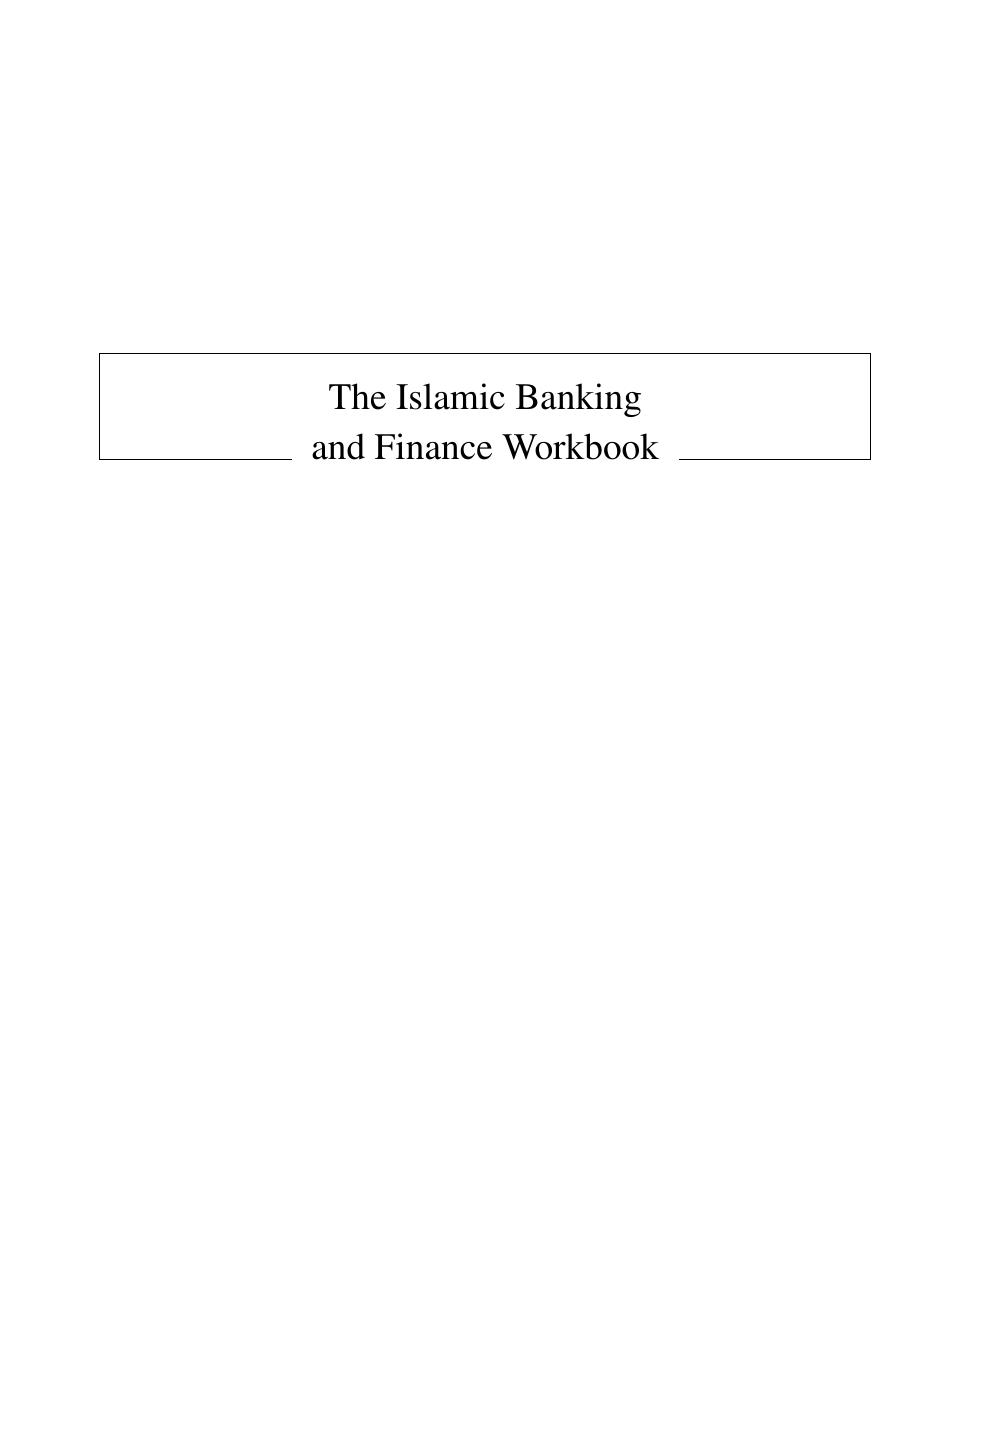 The Islamic Law of Banking and Finance, 2011